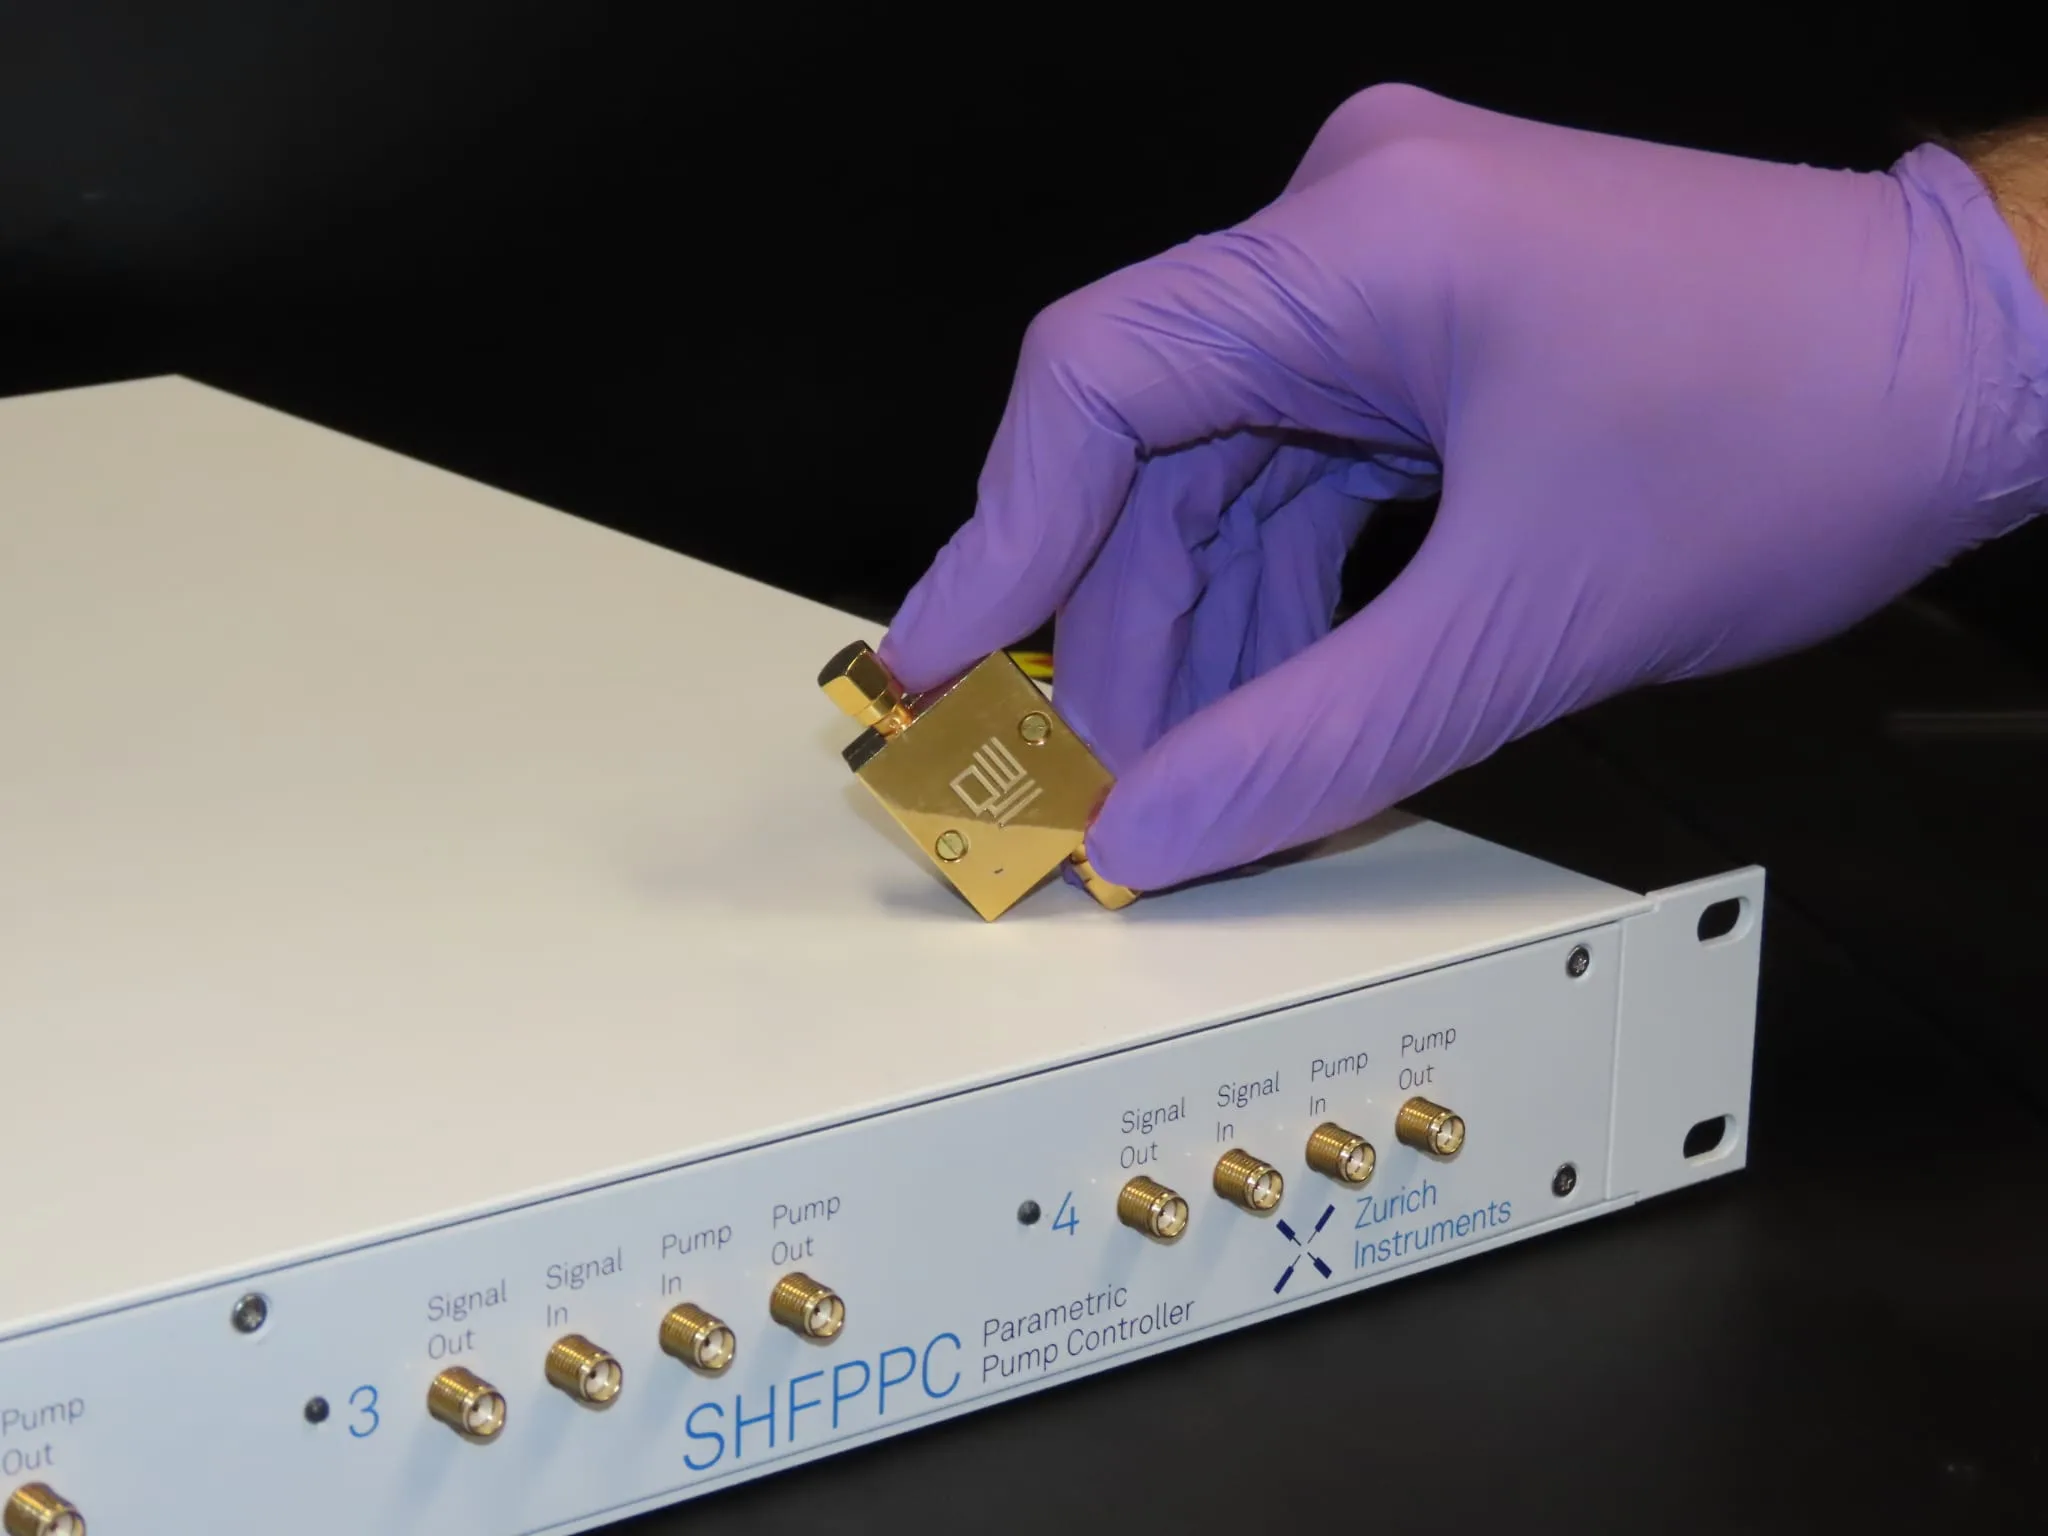 Zurich Instruments And Quantware Unveil Out-Of-The-Box Qubit Readout, Boosting Quantum Computing Accessibility